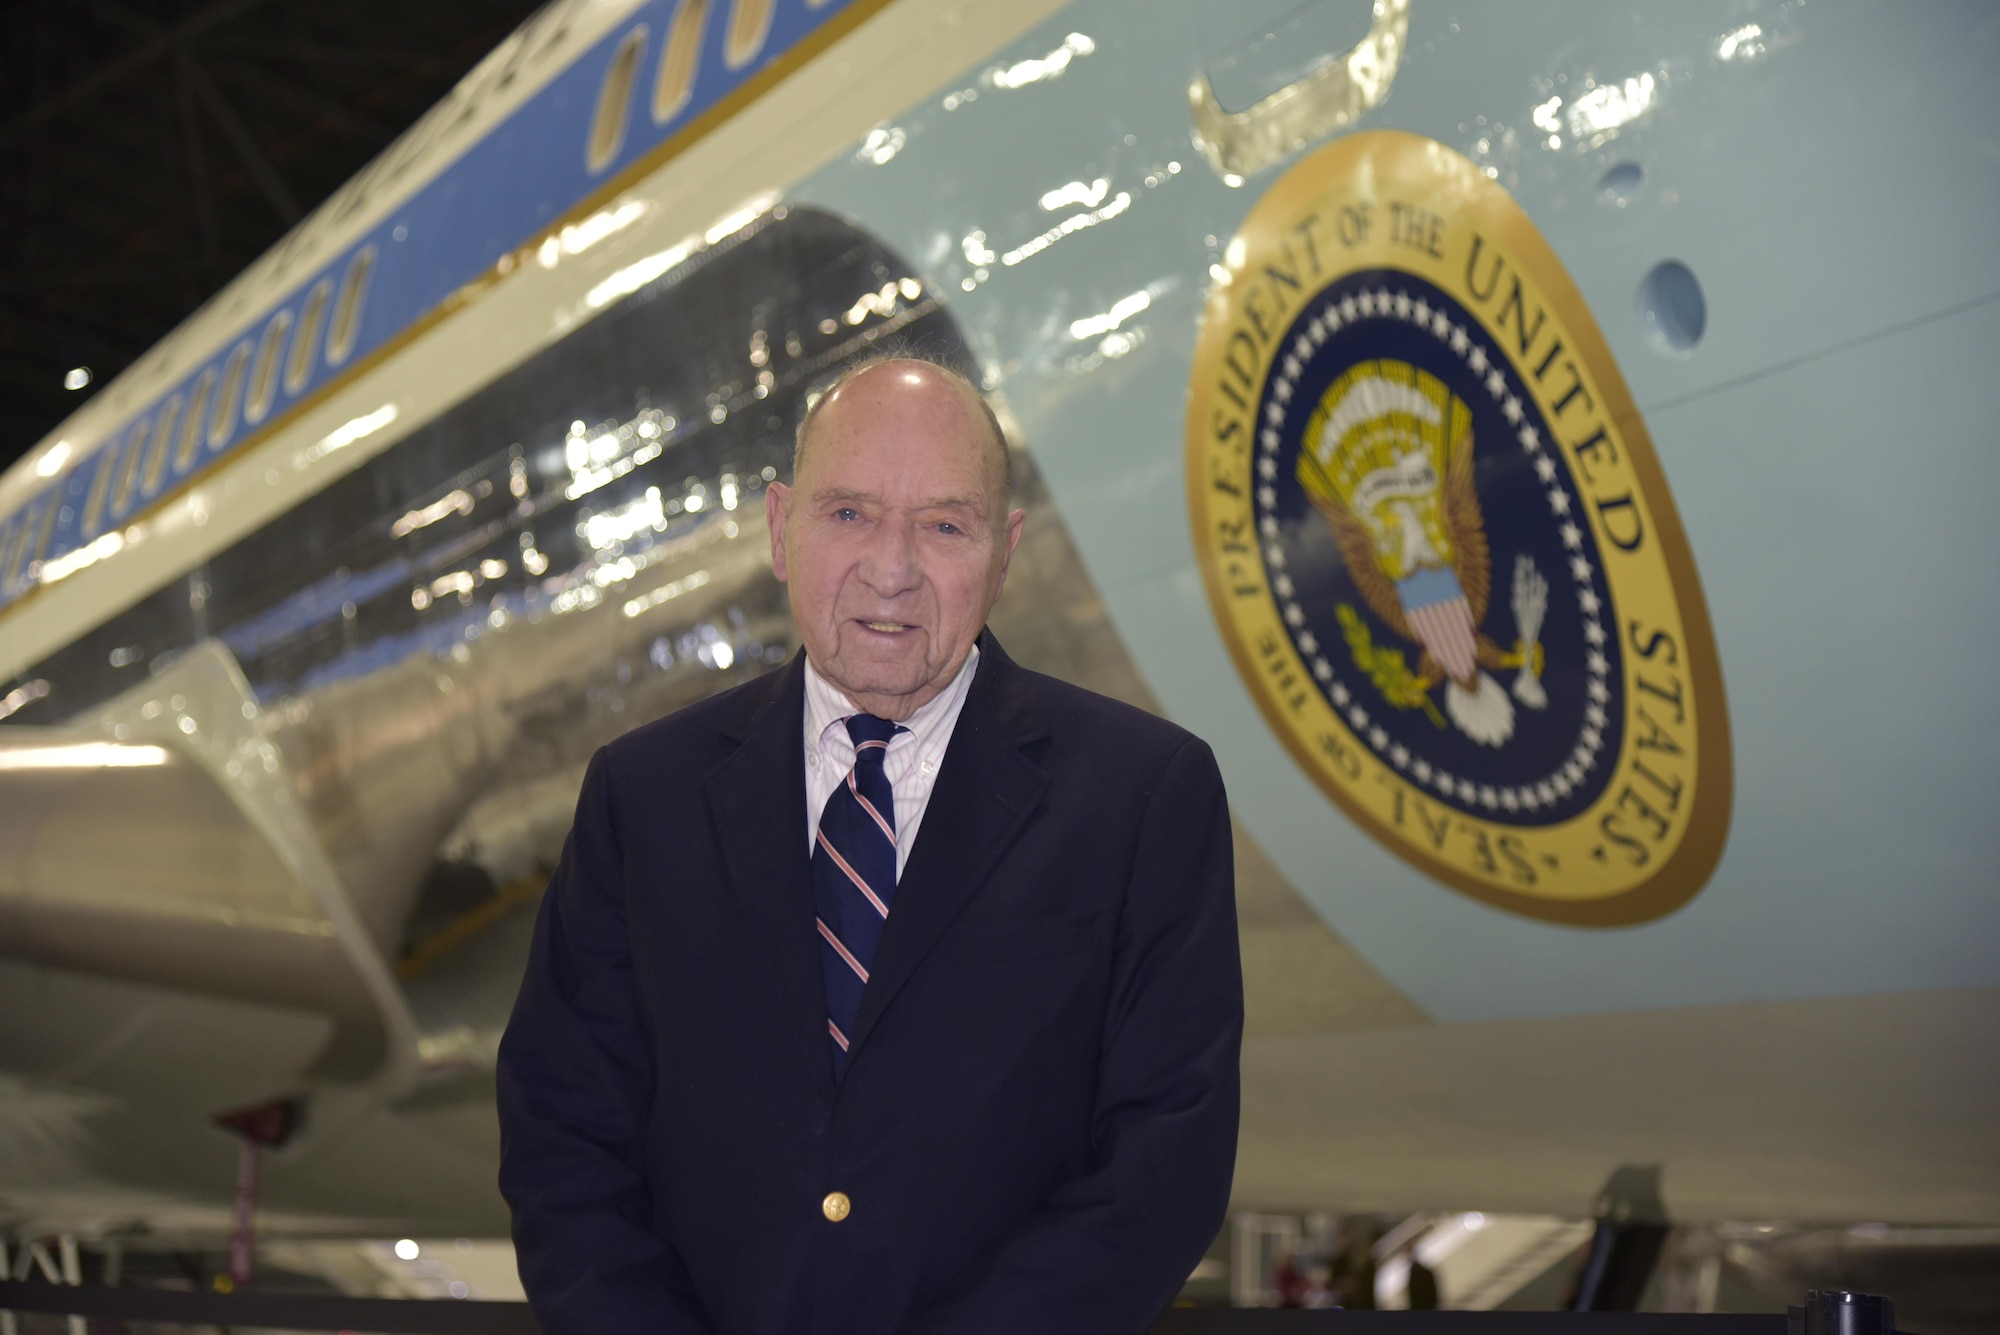 DAYTON, Ohio (30 Jan 2017)-- Former White House pool reporter Sid Davis visited the museum taking a tour of SAM 26000, the Presidential aircraft that carried John F. Kennedy’s body from Dallas to Washington D.C. on Nov. 22, 1963. Davis heard the gun shots and covered the story, including the swearing in of Lyndon B. Johnson aboard the aircraft. (U.S. Air Force photo by Ken LaRock)